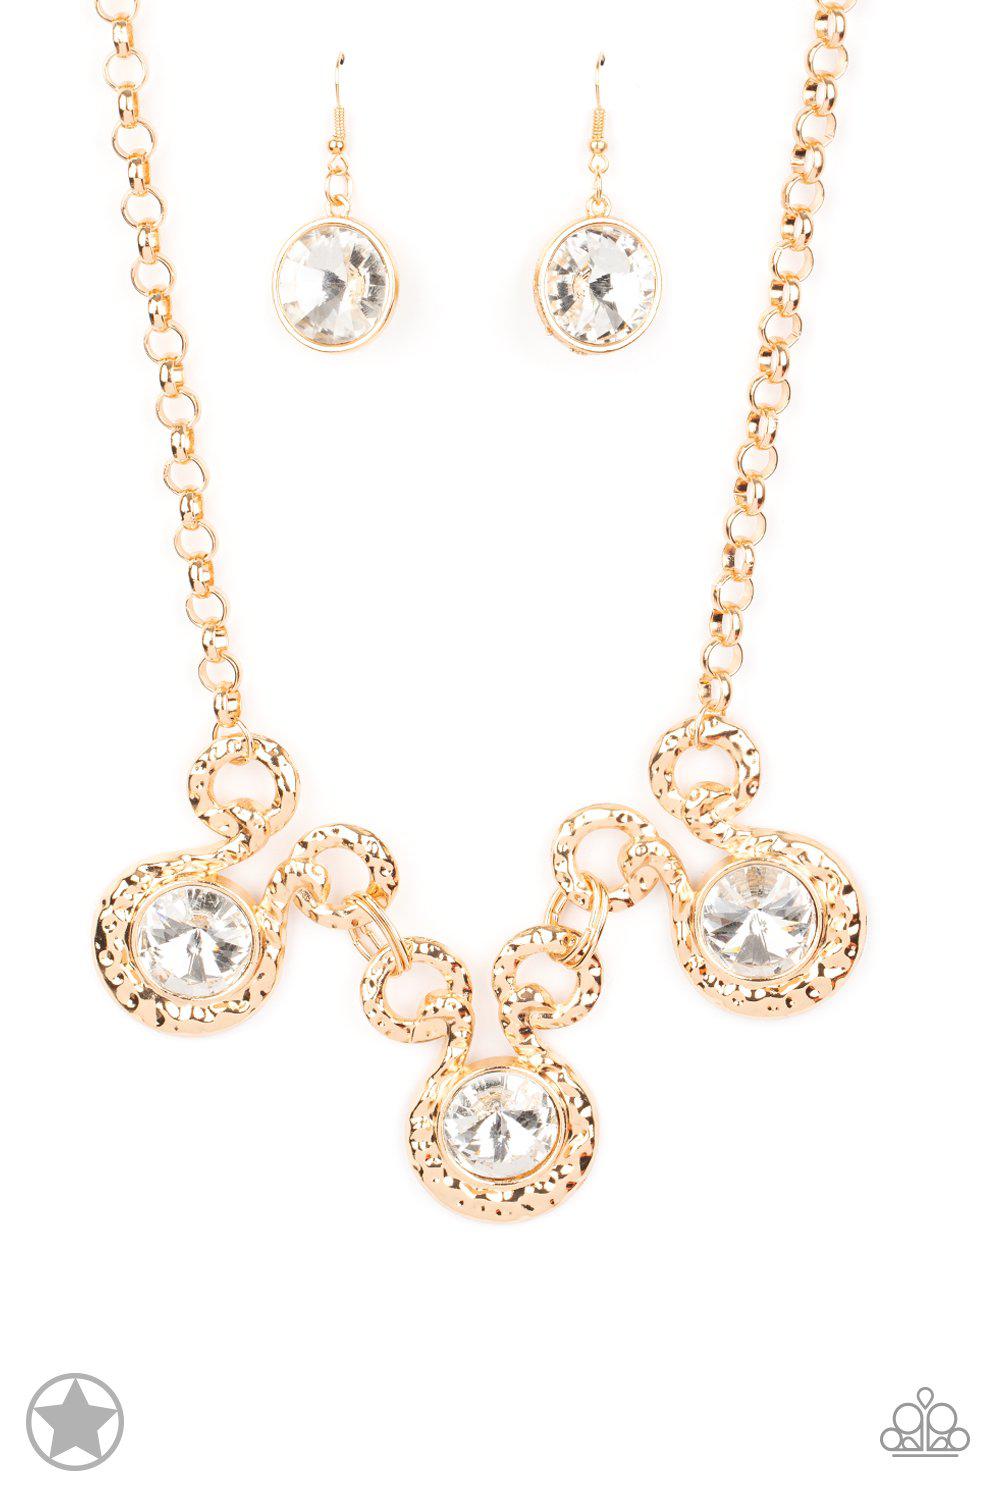 Hypnotized Gold and White Rhinestone Necklace and matching Earrings - Paparazzi Accessories - lightbox -CarasShop.com - $5 Jewelry by Cara Jewels